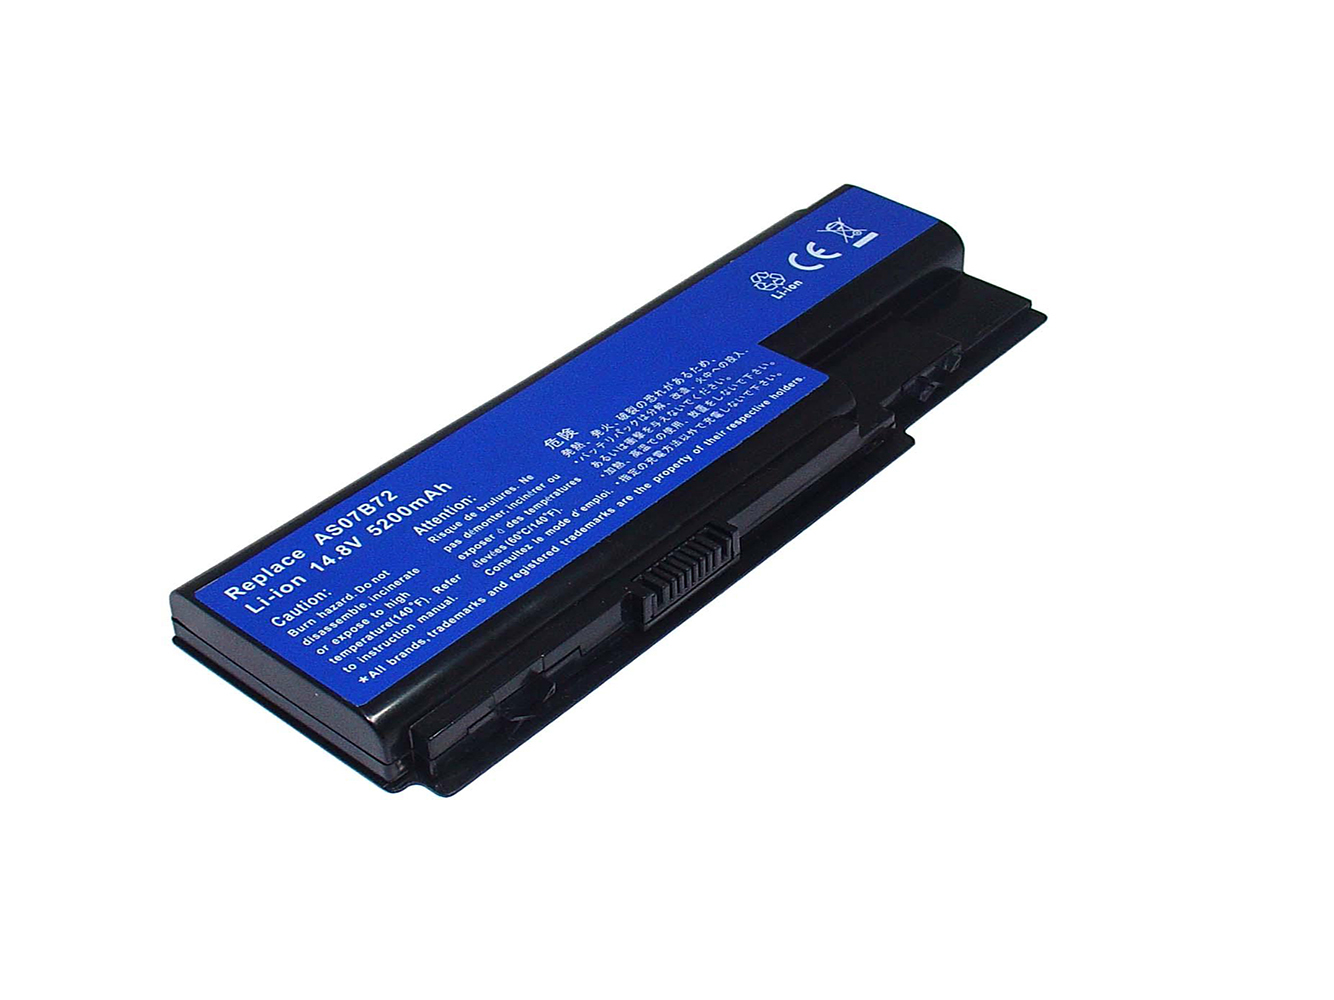 Replacement for GATEWAY MD7801u Laptop Battery